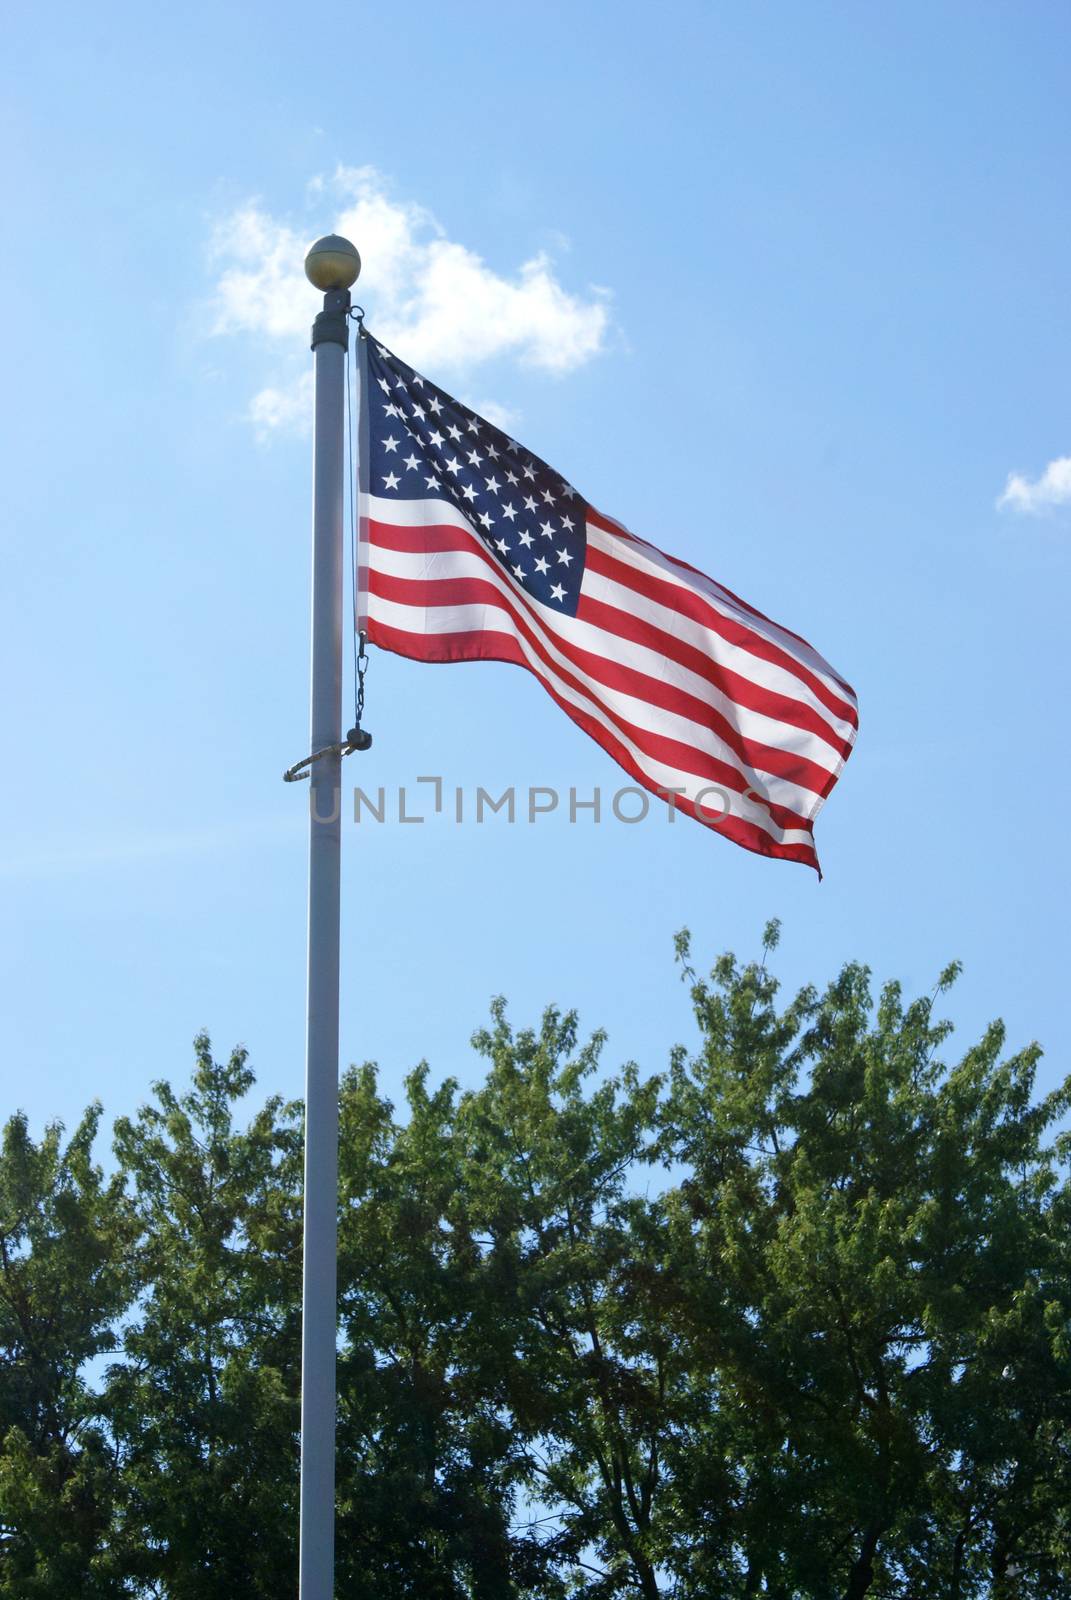 The American flag is flown proudly on a pole.